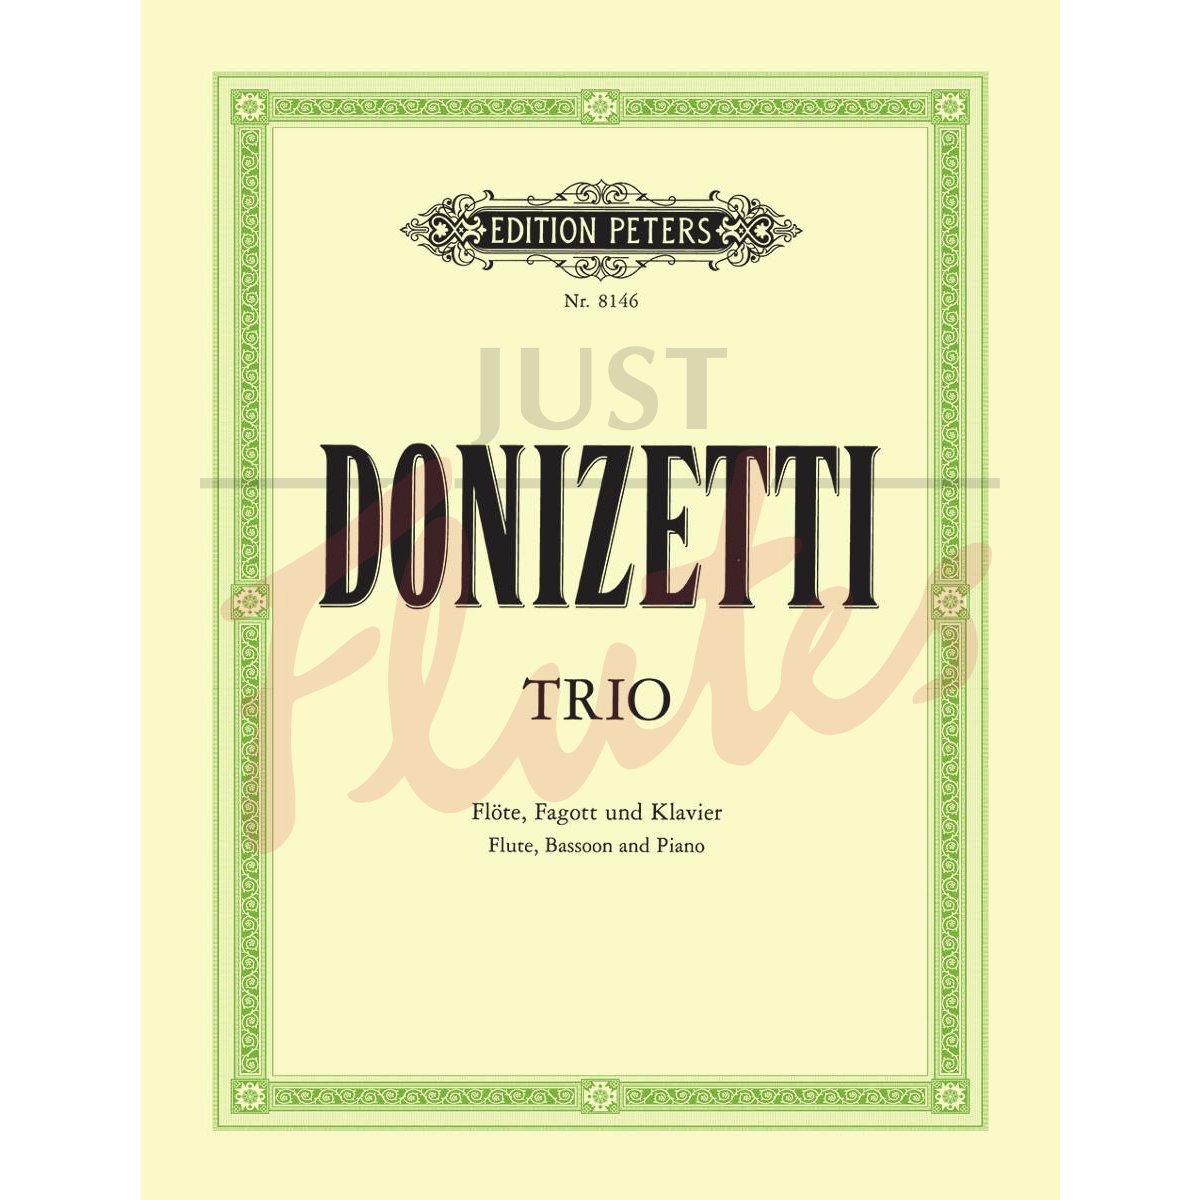 Trio for Flute, Bassoon and Piano